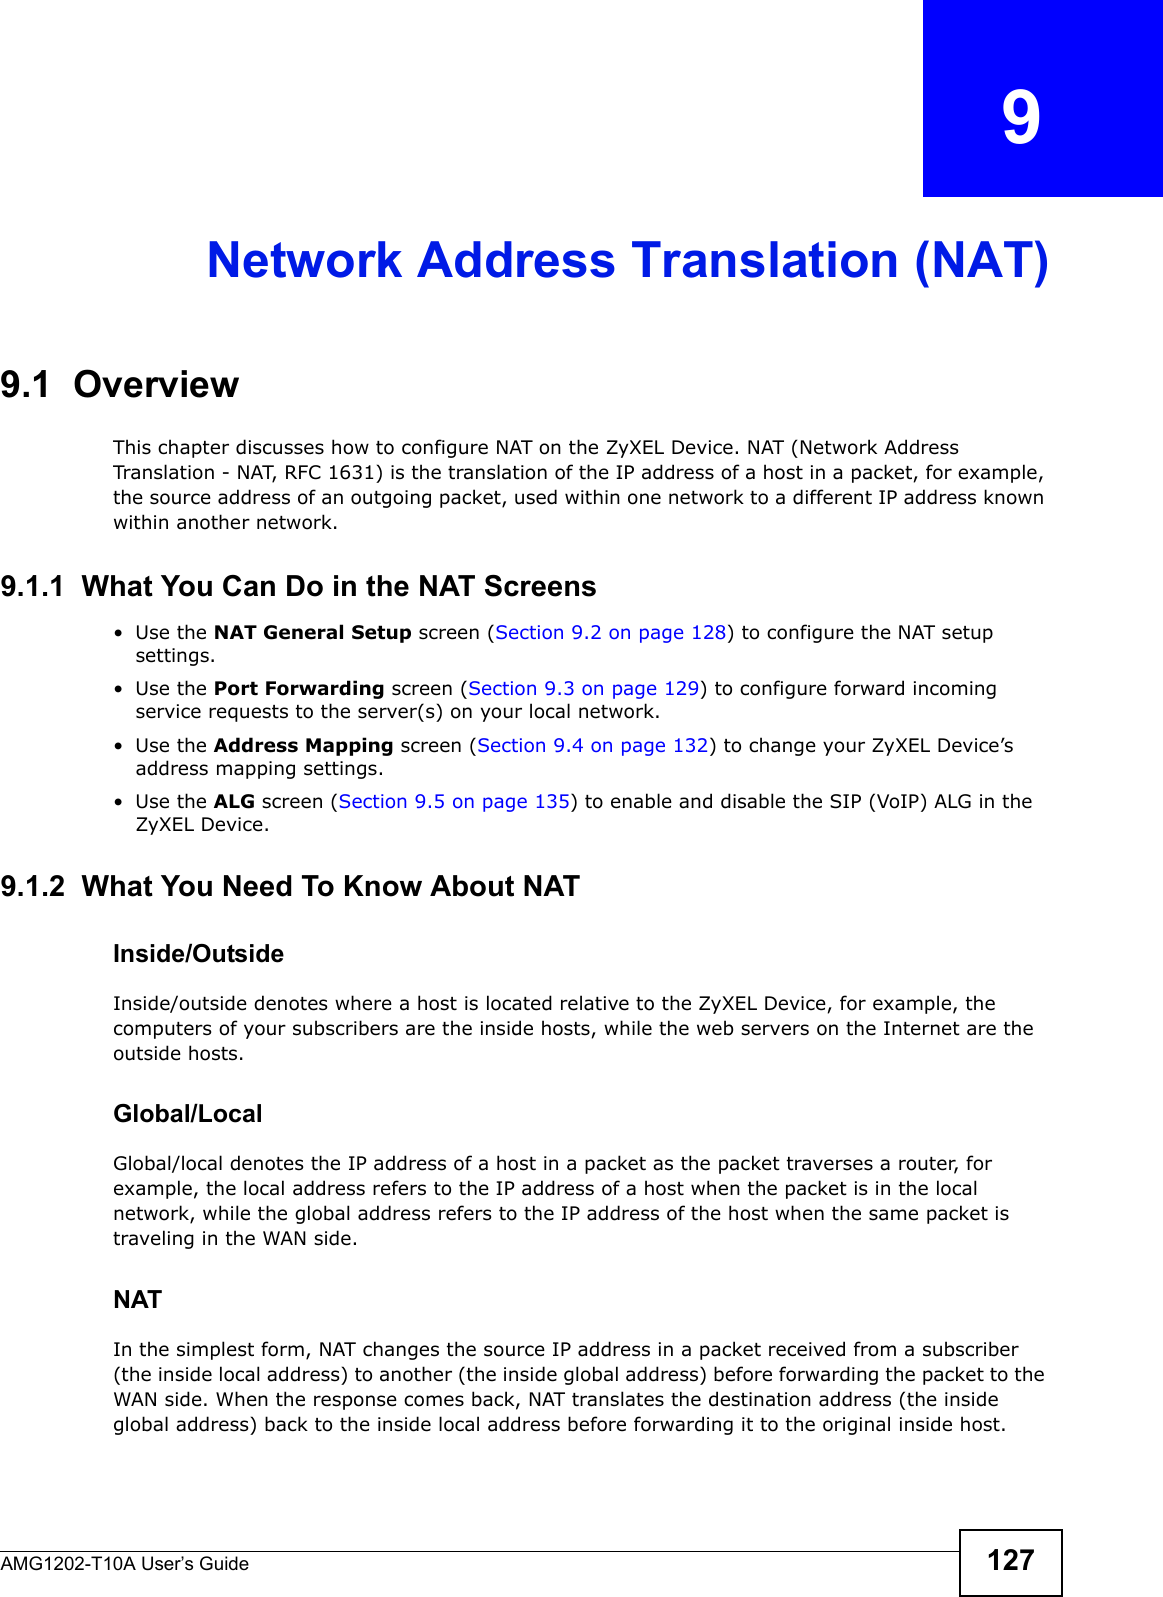 AMG1202-T10A User’s Guide 127CHAPTER   9Network Address Translation (NAT)9.1  OverviewThis chapter discusses how to configure NAT on the ZyXEL Device. NAT (Network Address Translation - NAT, RFC 1631) is the translation of the IP address of a host in a packet, for example, the source address of an outgoing packet, used within one network to a different IP address known within another network.9.1.1  What You Can Do in the NAT Screens•Use the NAT General Setup screen (Section 9.2 on page 128) to configure the NAT setup settings.•Use the Port Forwarding screen (Section 9.3 on page 129) to configure forward incoming service requests to the server(s) on your local network. •Use the Address Mapping screen (Section 9.4 on page 132) to change your ZyXEL Device’s address mapping settings.•Use the ALG screen (Section 9.5 on page 135) to enable and disable the SIP (VoIP) ALG in the ZyXEL Device.9.1.2  What You Need To Know About NATInside/OutsideInside/outside denotes where a host is located relative to the ZyXEL Device, for example, the computers of your subscribers are the inside hosts, while the web servers on the Internet are the outside hosts. Global/LocalGlobal/local denotes the IP address of a host in a packet as the packet traverses a router, for example, the local address refers to the IP address of a host when the packet is in the local network, while the global address refers to the IP address of the host when the same packet is traveling in the WAN side. NATIn the simplest form, NAT changes the source IP address in a packet received from a subscriber (the inside local address) to another (the inside global address) before forwarding the packet to the WAN side. When the response comes back, NAT translates the destination address (the inside global address) back to the inside local address before forwarding it to the original inside host.